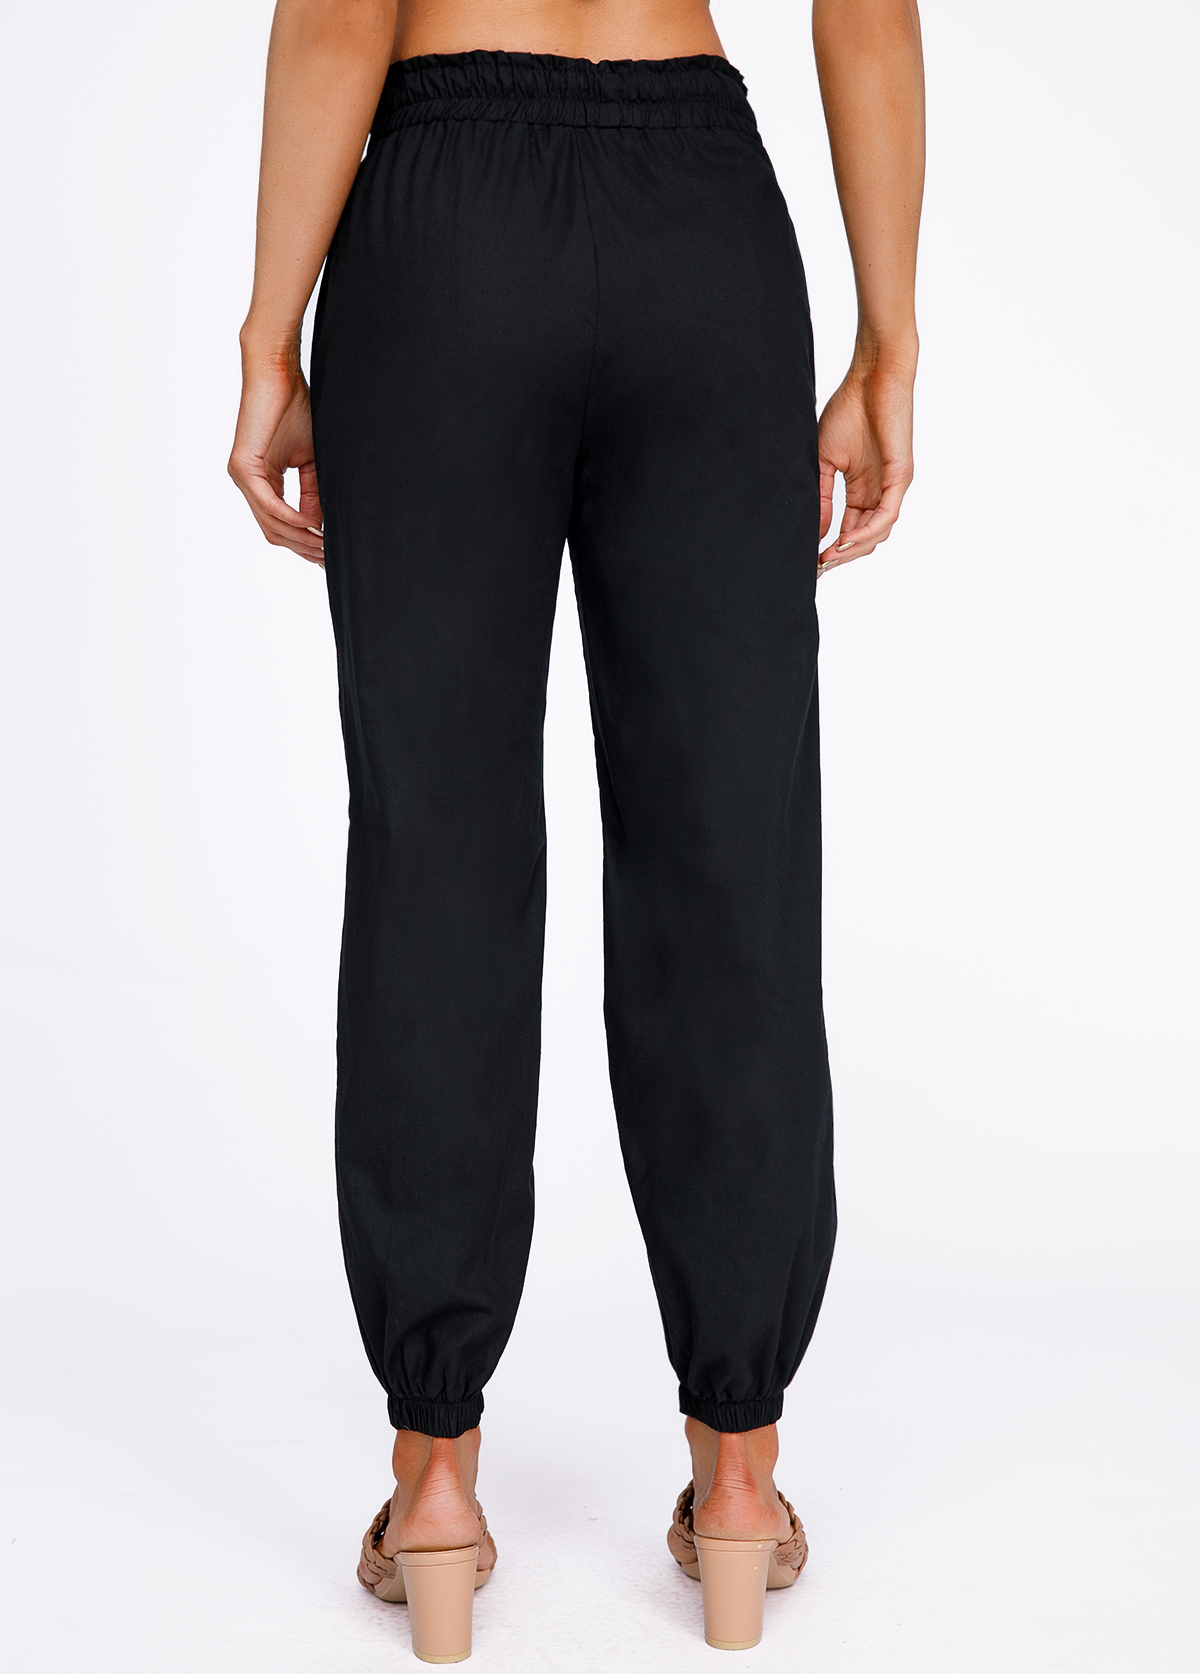 Black Drawstring Belted High Waisted Pants